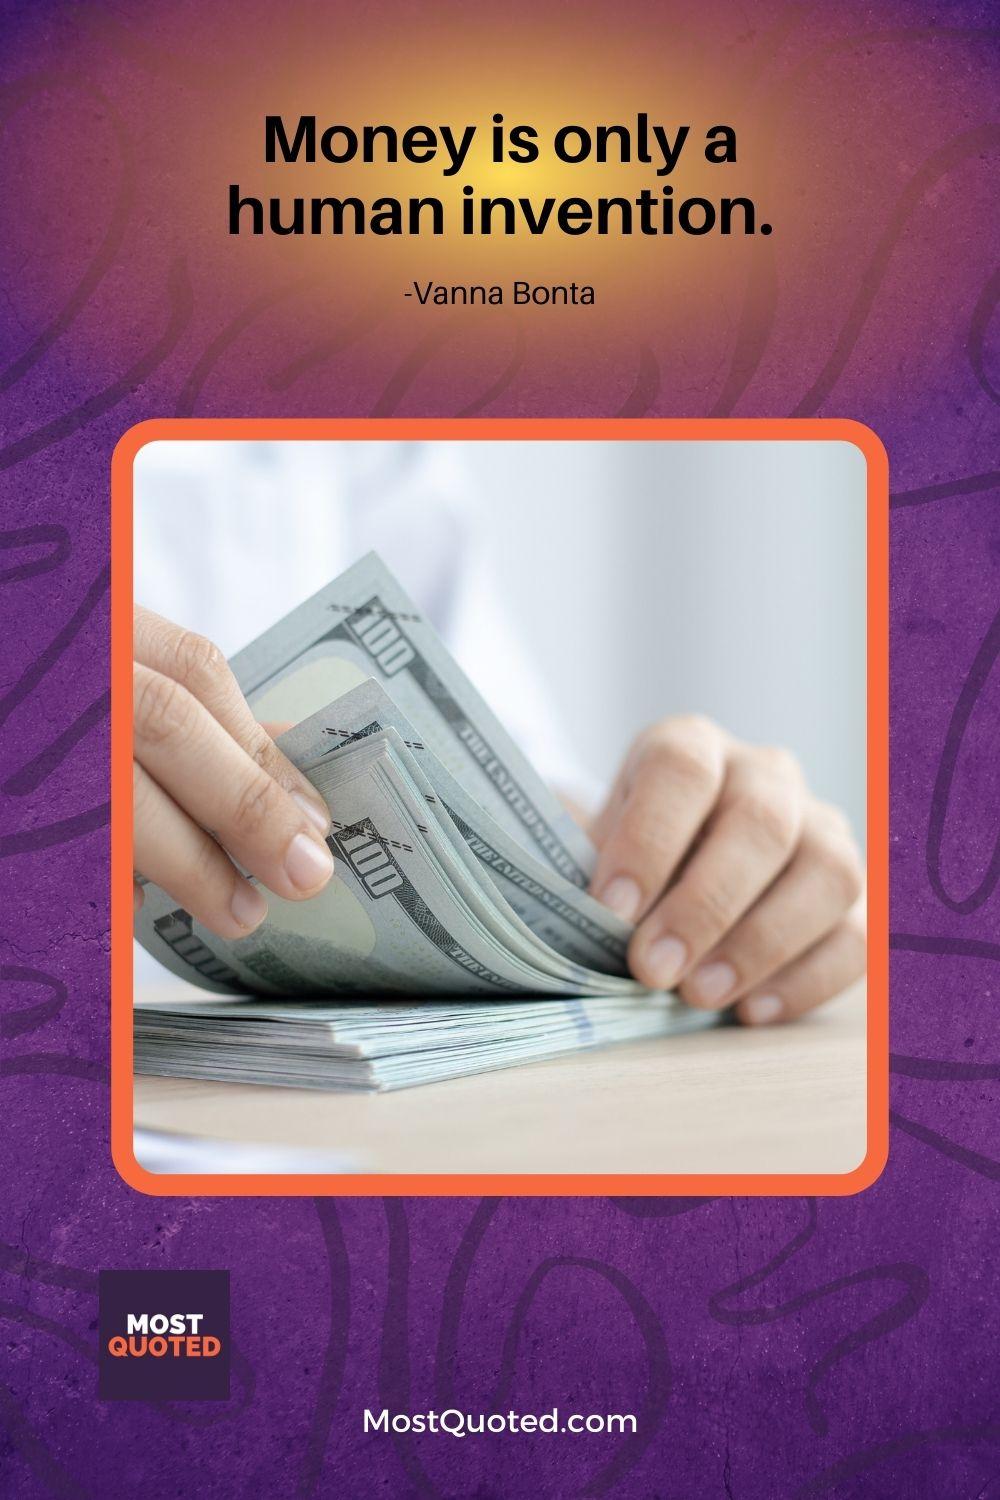 Money is only a human invention. - Vanna Bonta